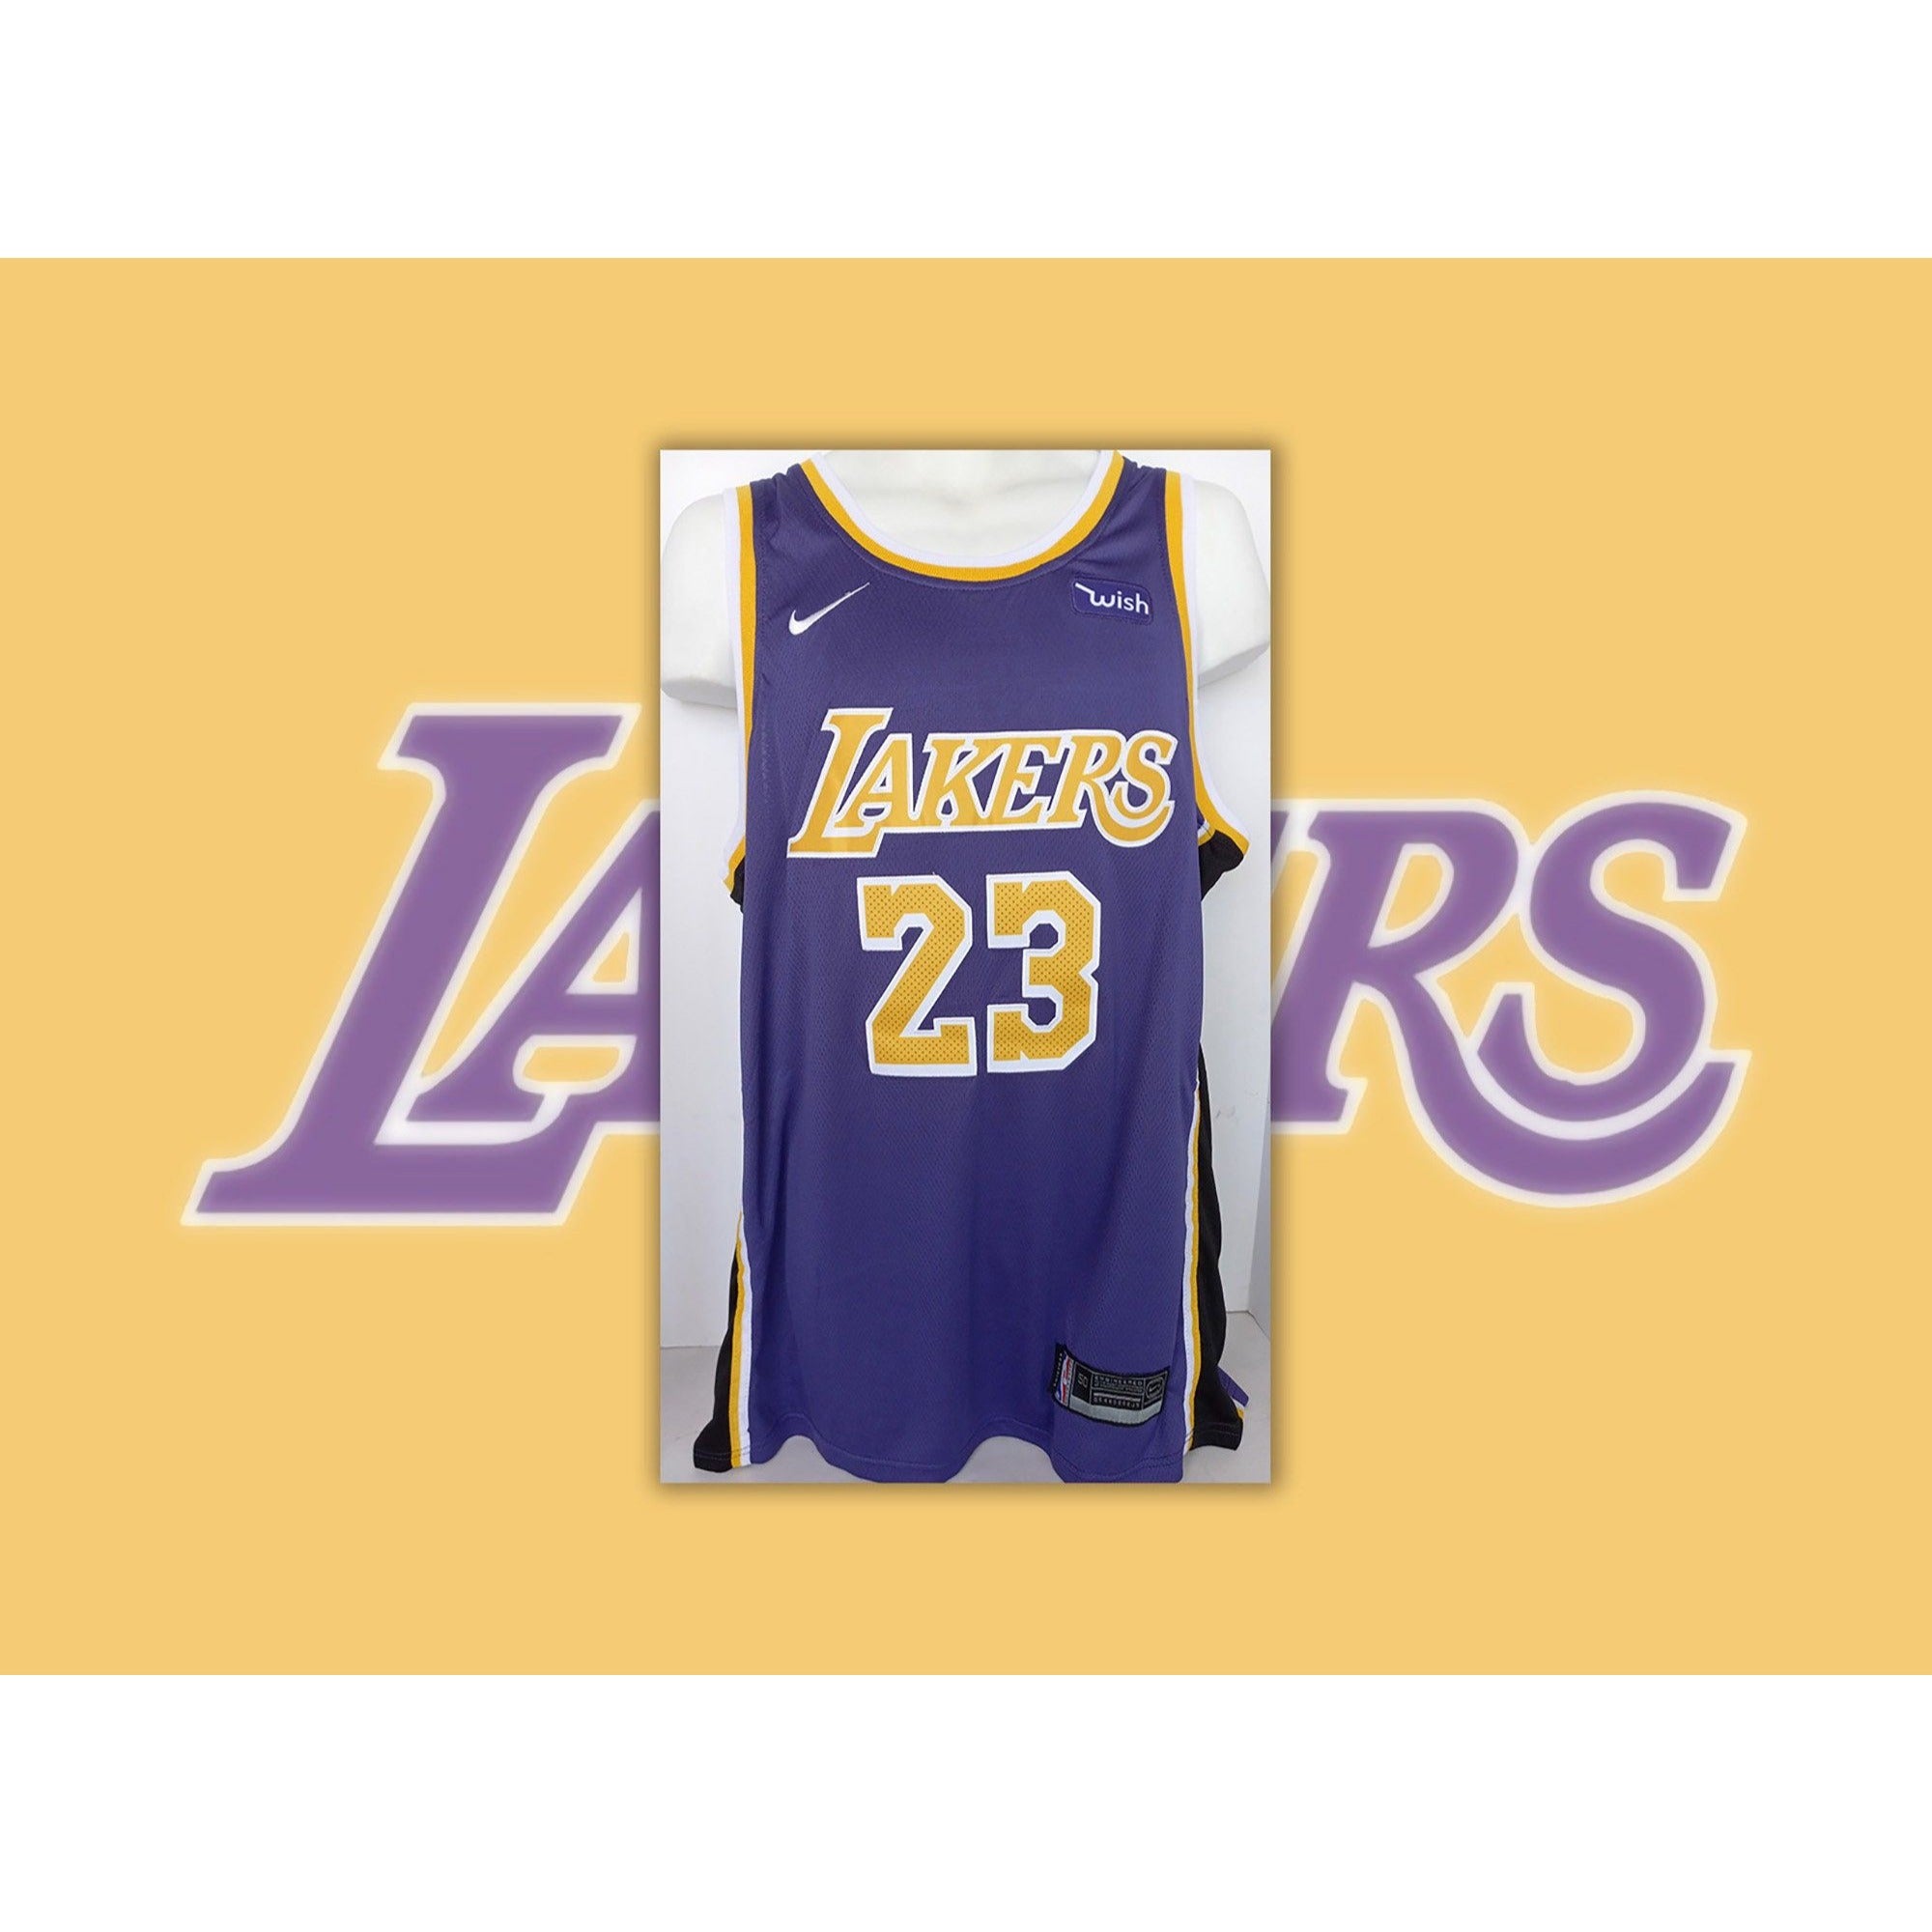 LeBron James Lakers Jersey, LeBron James Los Angeles Lakers Jersey, Sports  Fan Gear & Collectibles